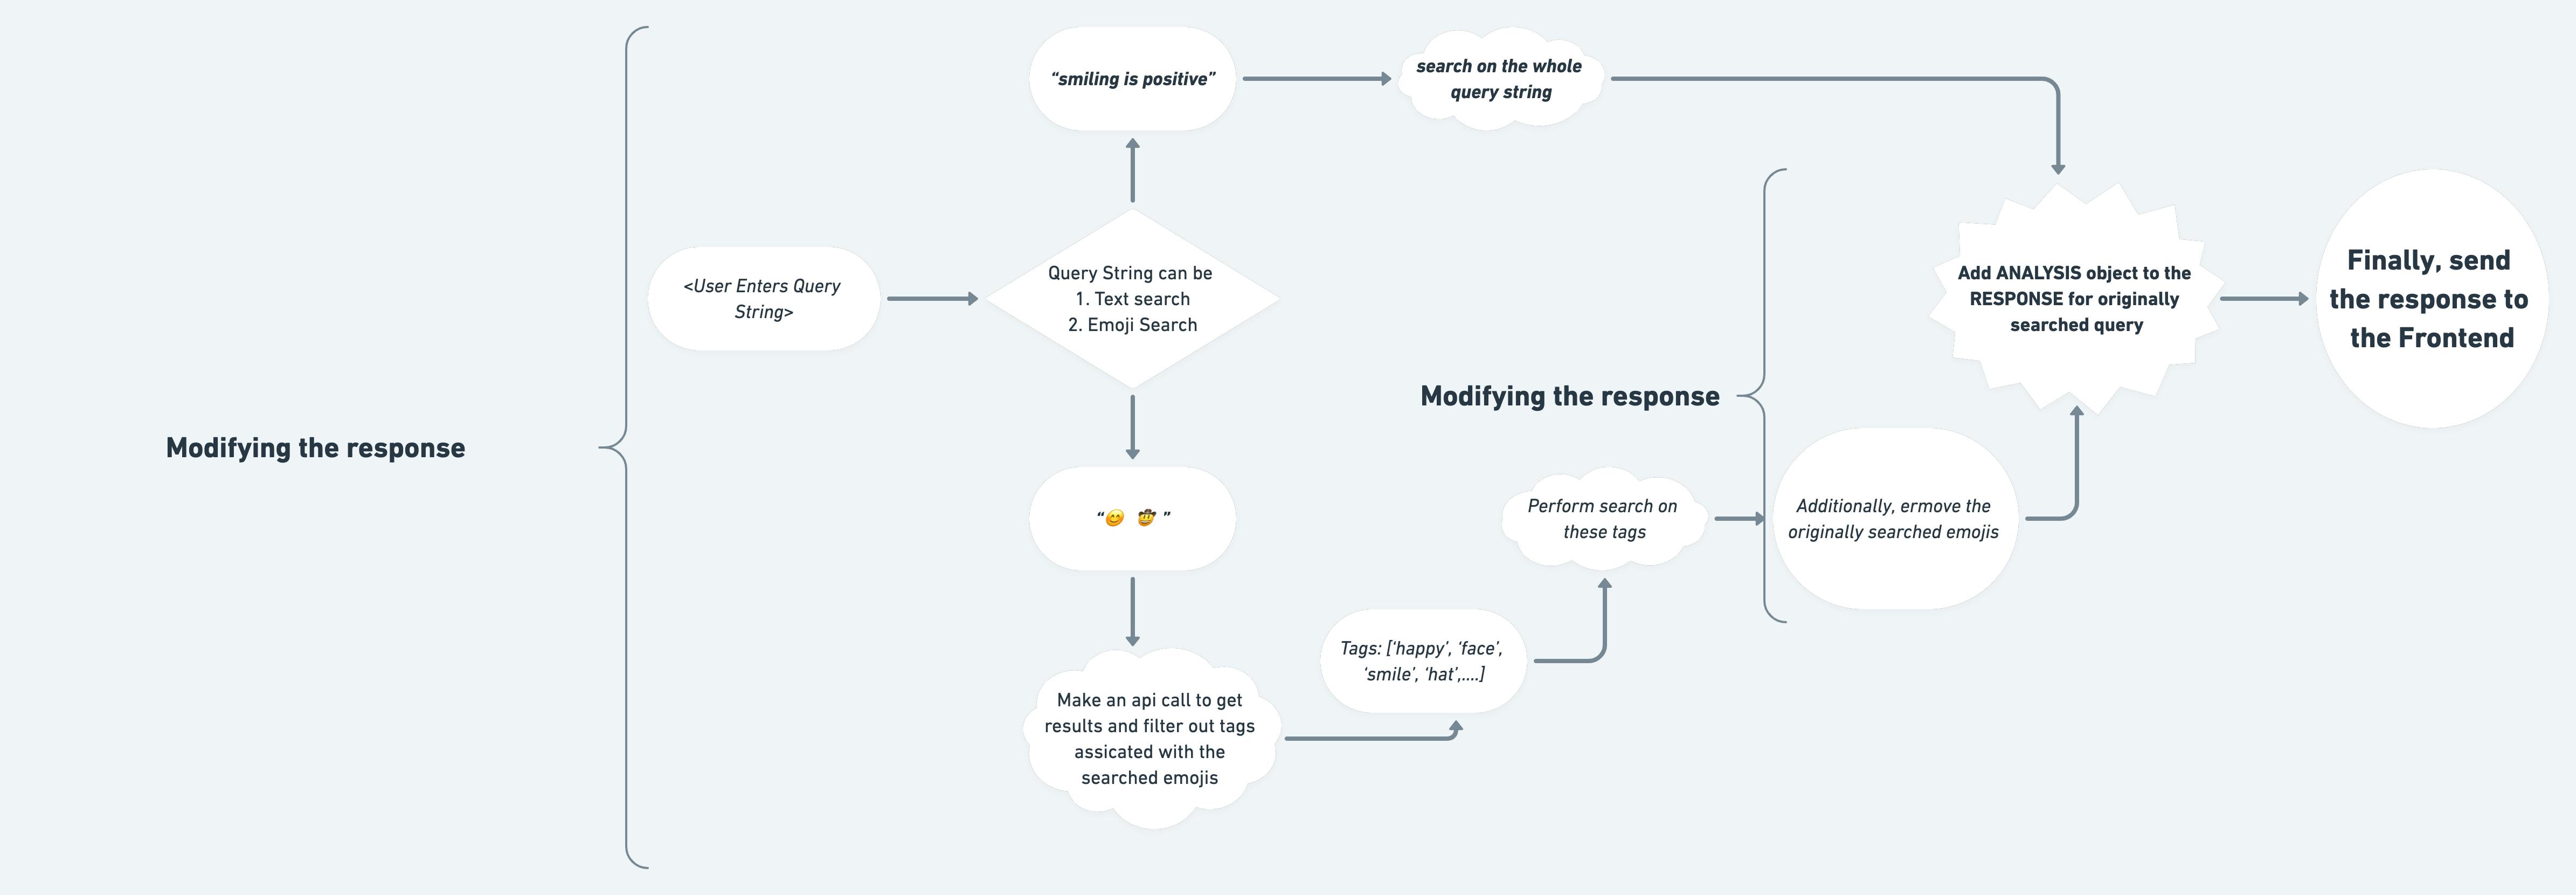 Flowchart of our application